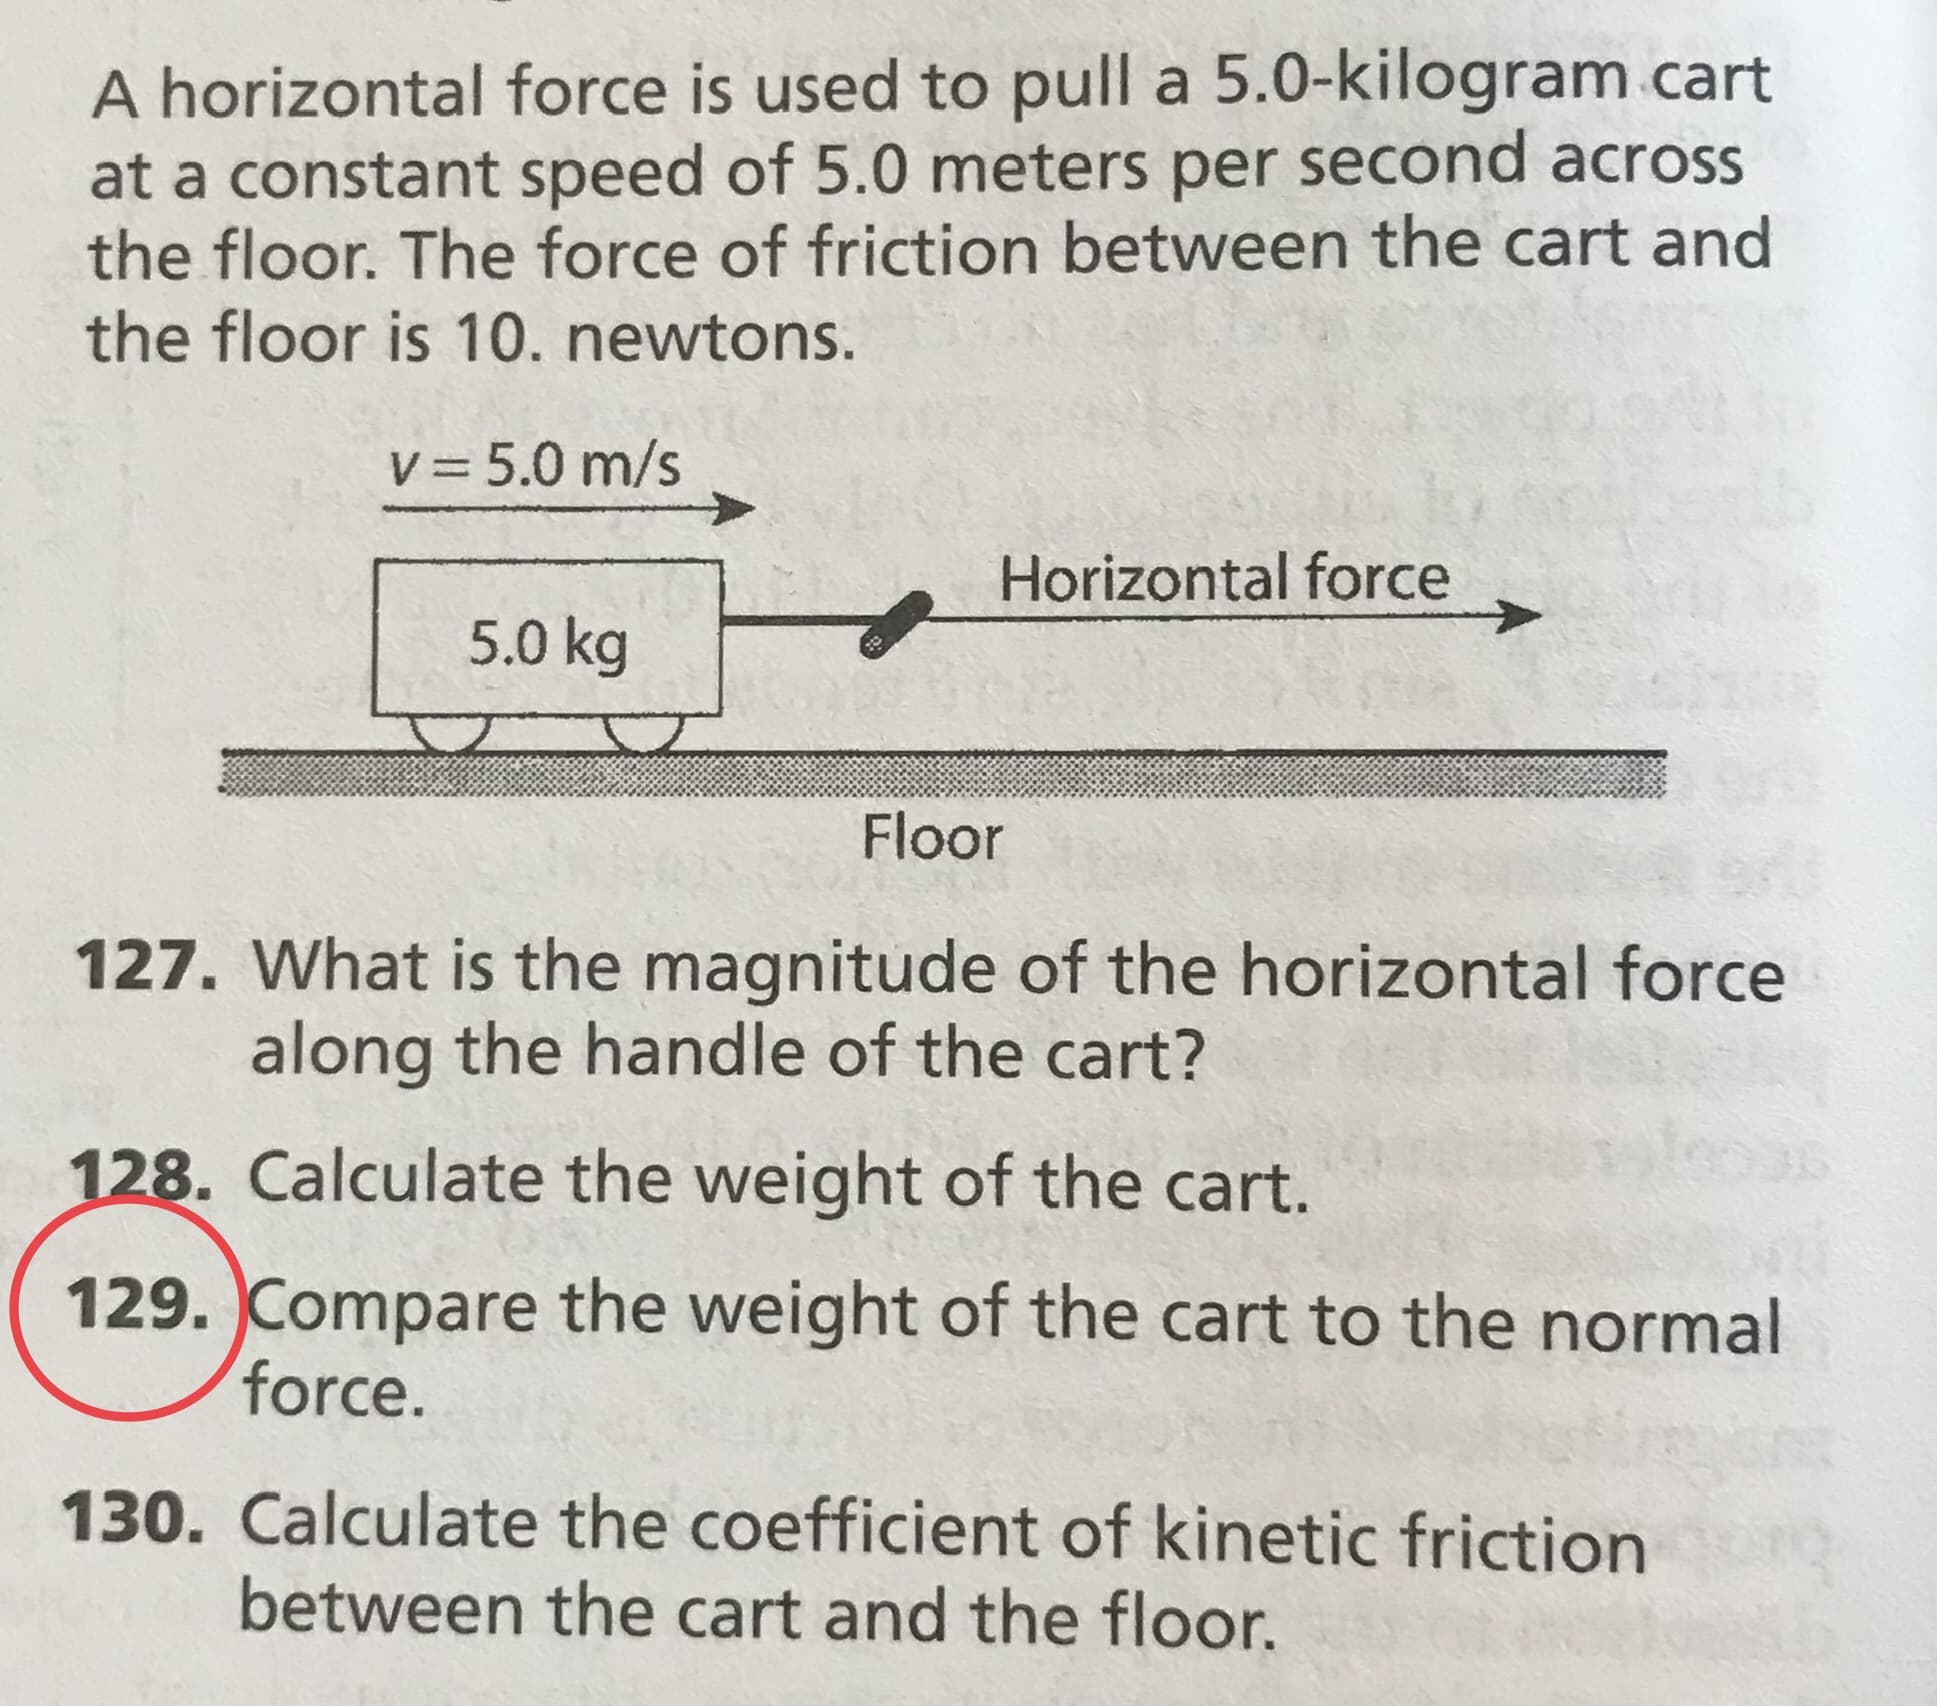 A horizontal force is used to pull a 5.0-kilogram cart
at a constant speed of 5.0 meters per second across
the floor. The force of friction between the cart and
the floor is 10. newtons.
V 5.0 m/s
Horizontal force
5.0 kg
Floor
127. What is the magnitude of the horizontal force
along the handle of the cart?
128. Calculate the weight of the cart.
129. Compare the weight of the cart to the normal
force.
130. Calculate the coefficient of kinetic friction
between the cart and the floor.
